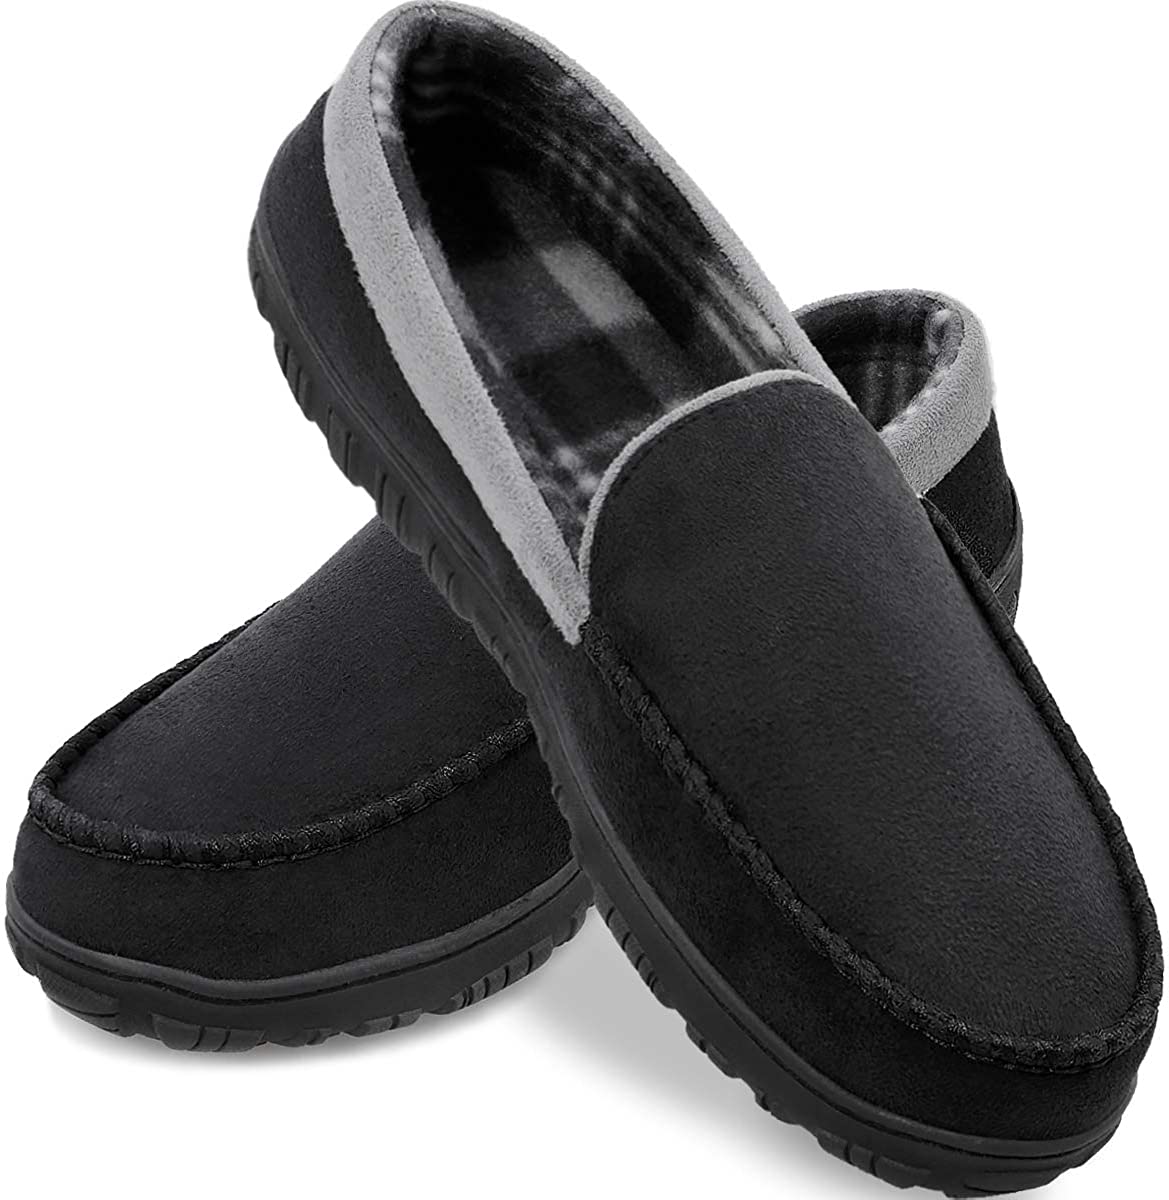 MIXIN Mens Moccasins Slippers-Memory Foam Fleece Indoor House Shoes Slip on PU Loafer Warm for Driving